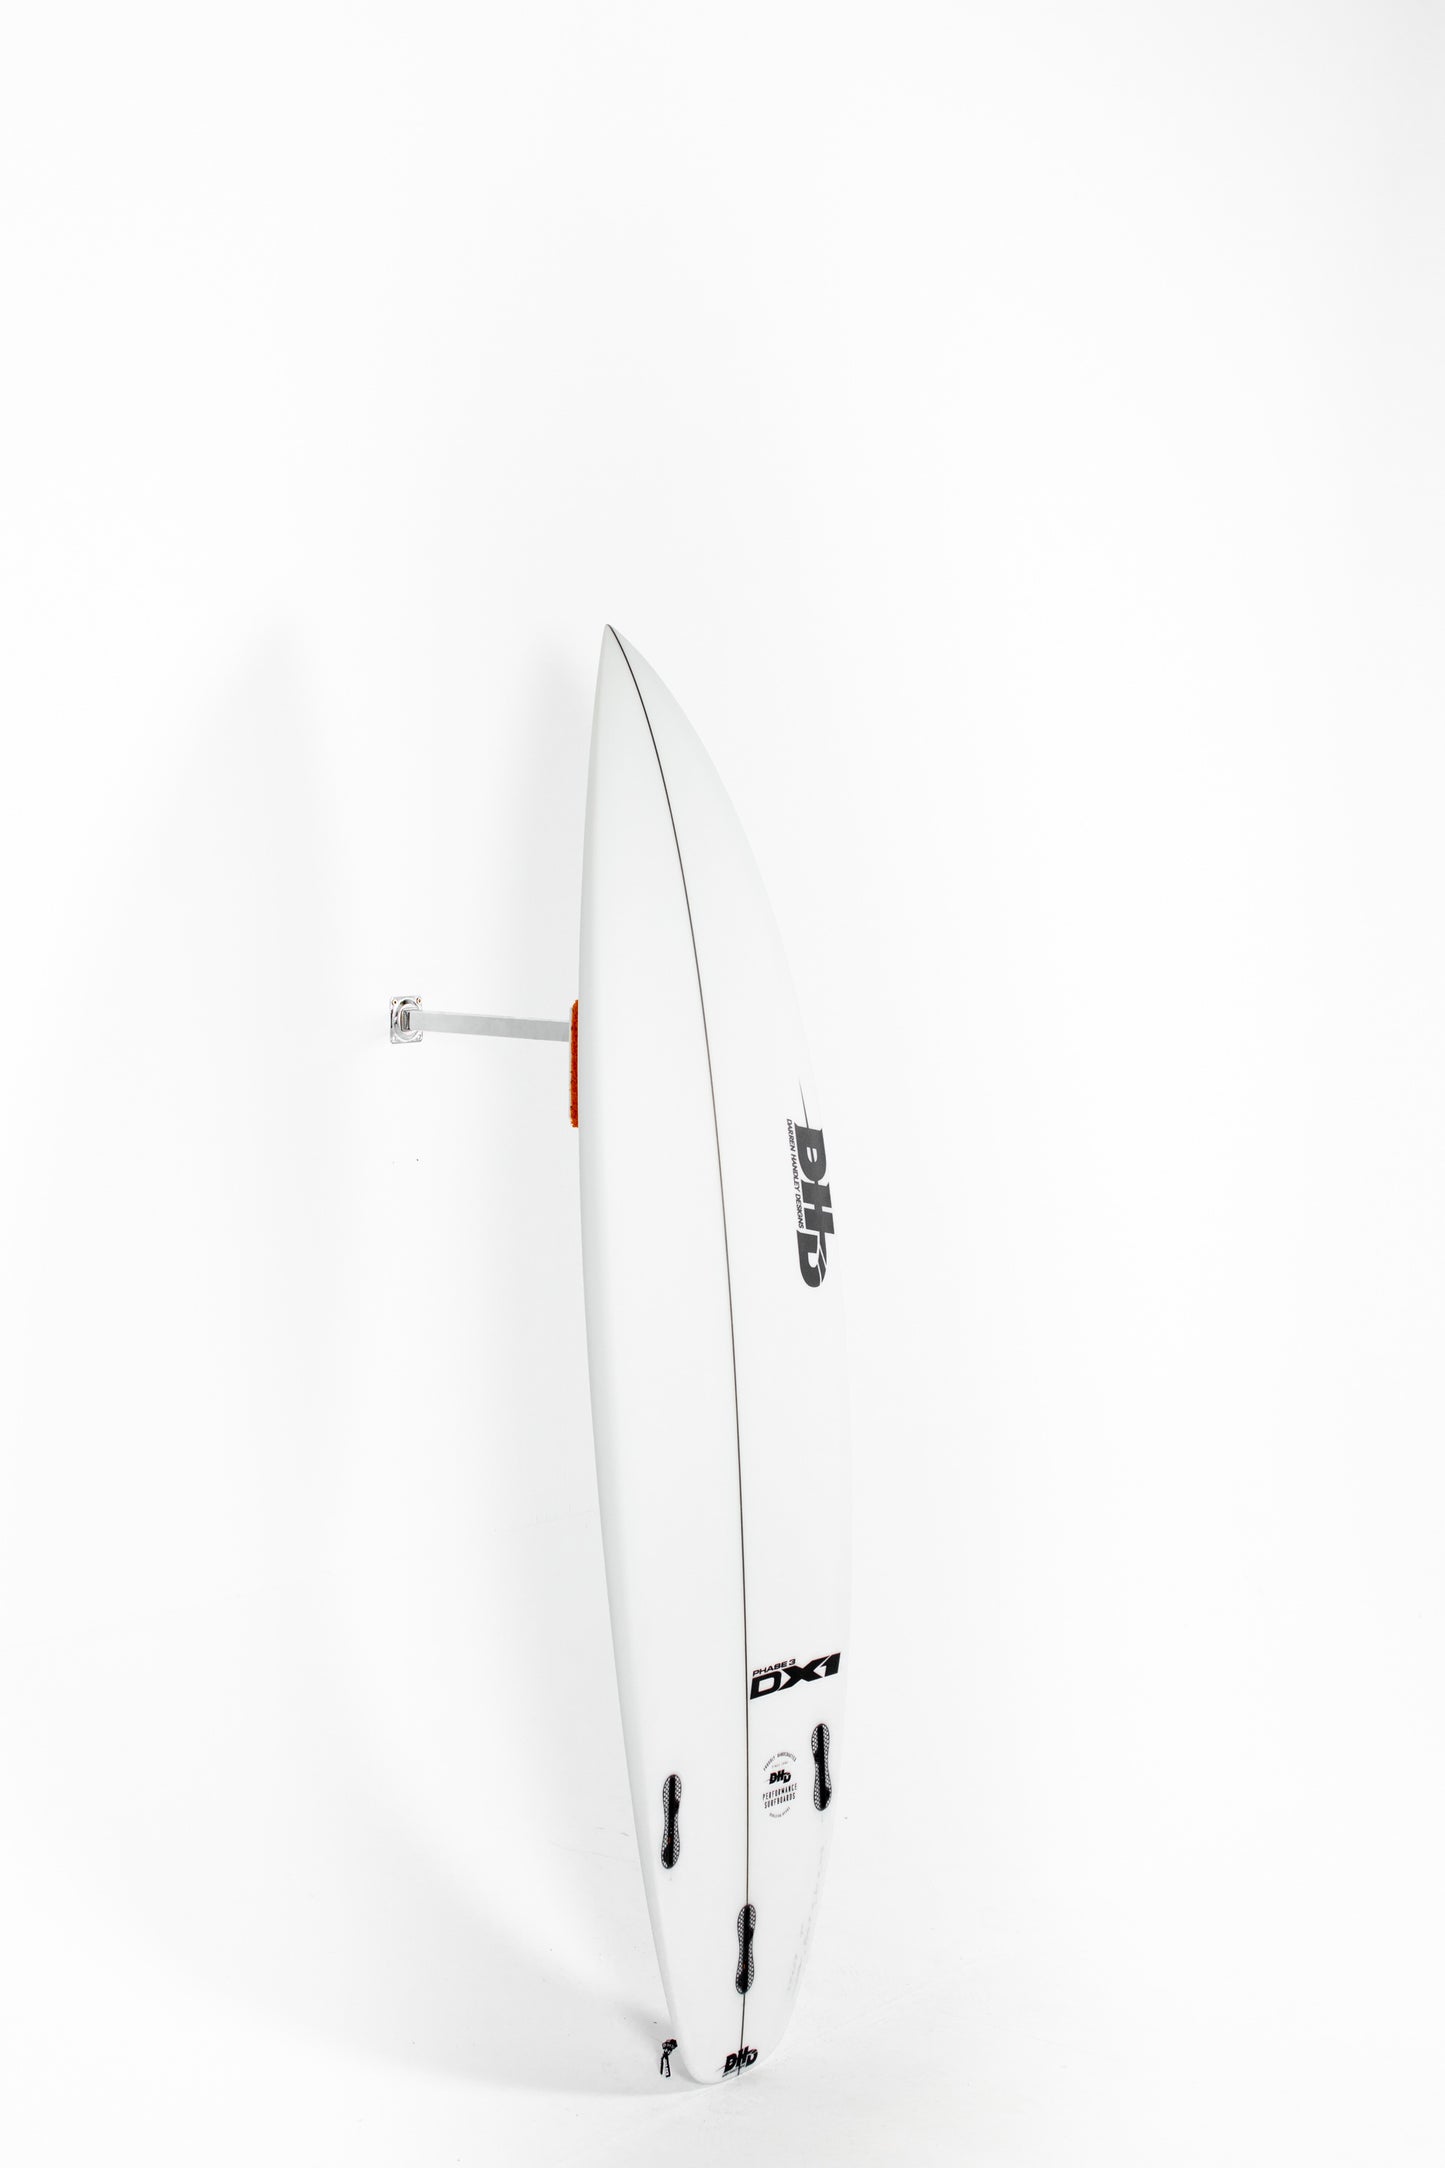 DHD - DX1 PHASE 3 by Darren Handley 5'10